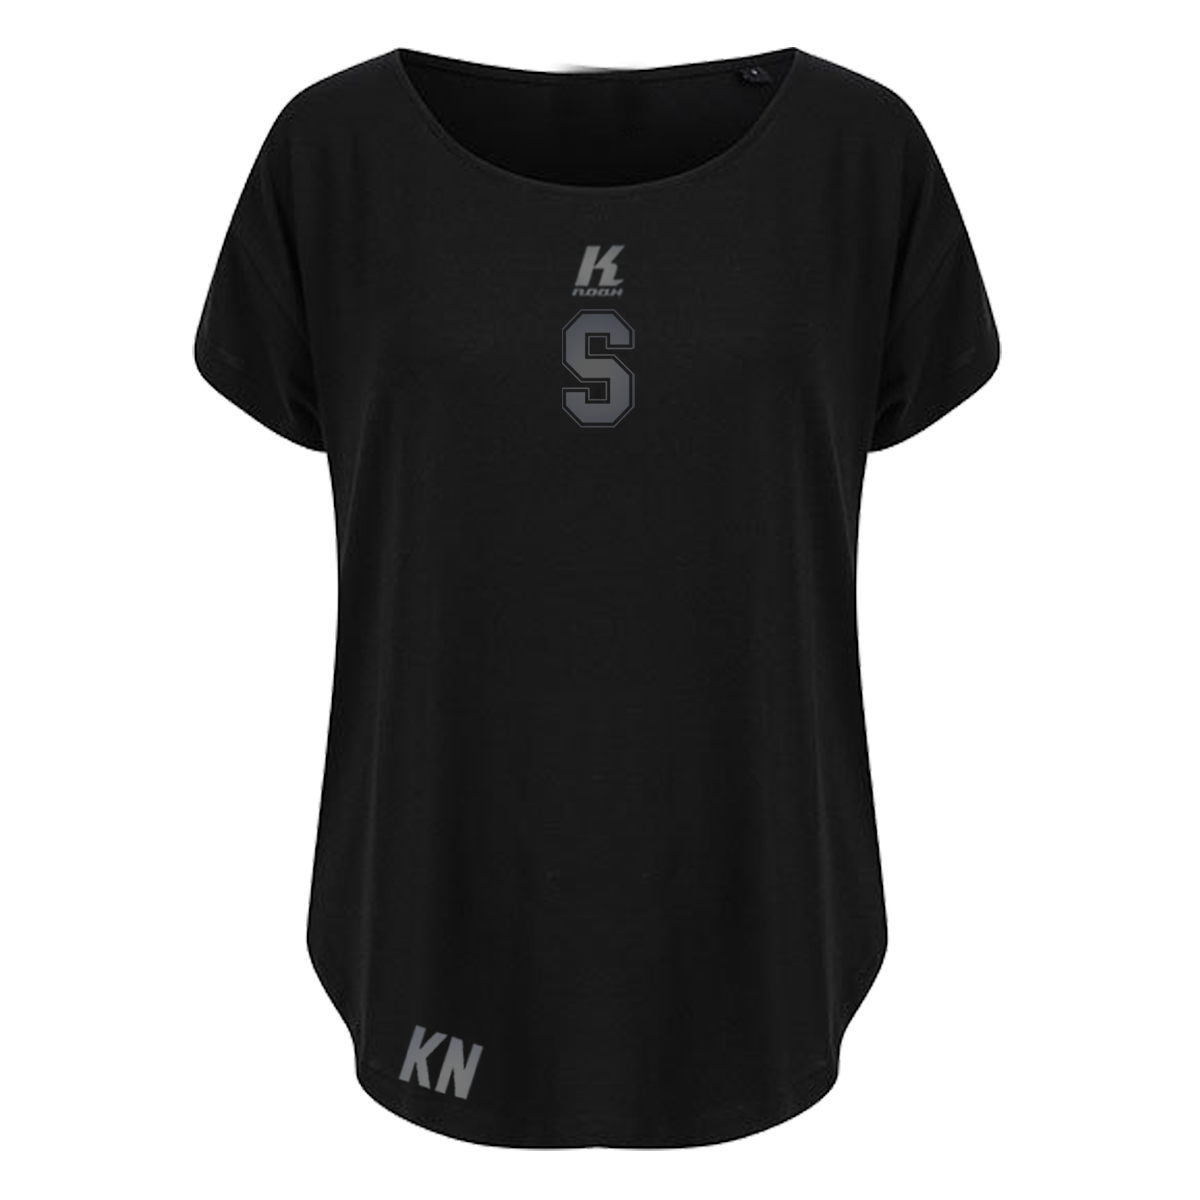 Scorpions "Blackline" Womens Sports Tee TL527 with Initials/Playernumber